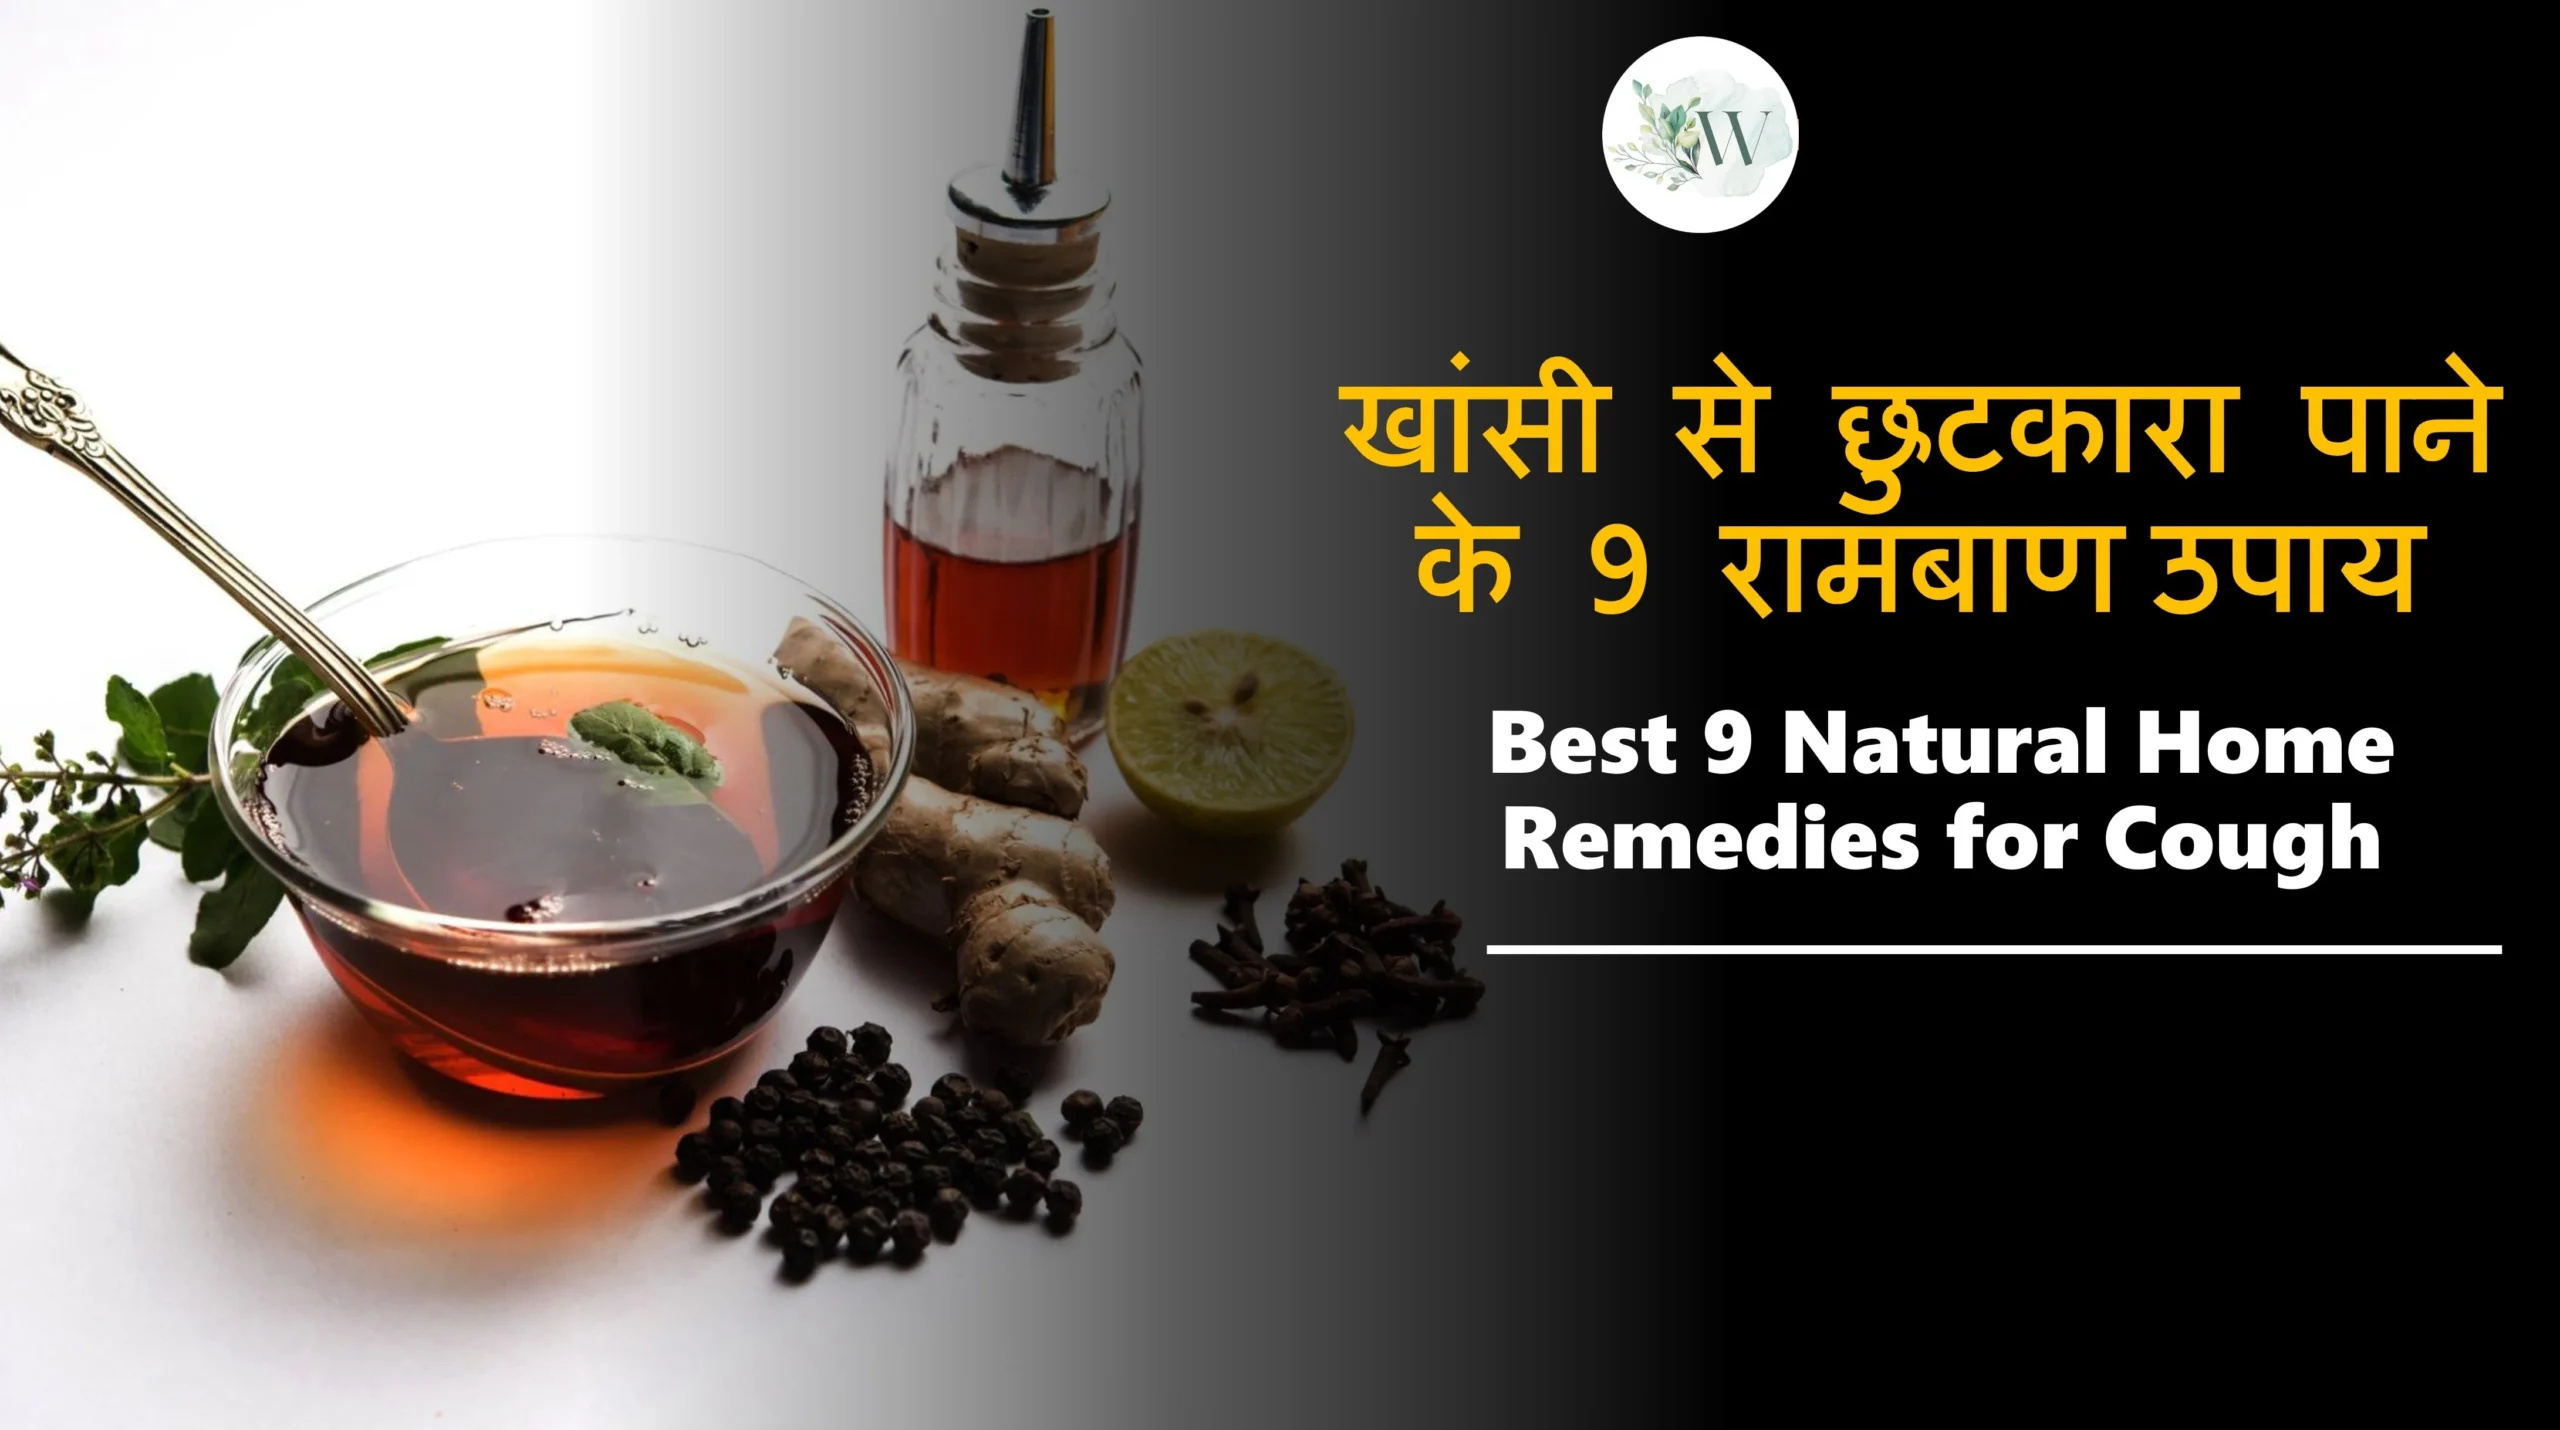 Best Natural Home Remedies for Cough in Hindi